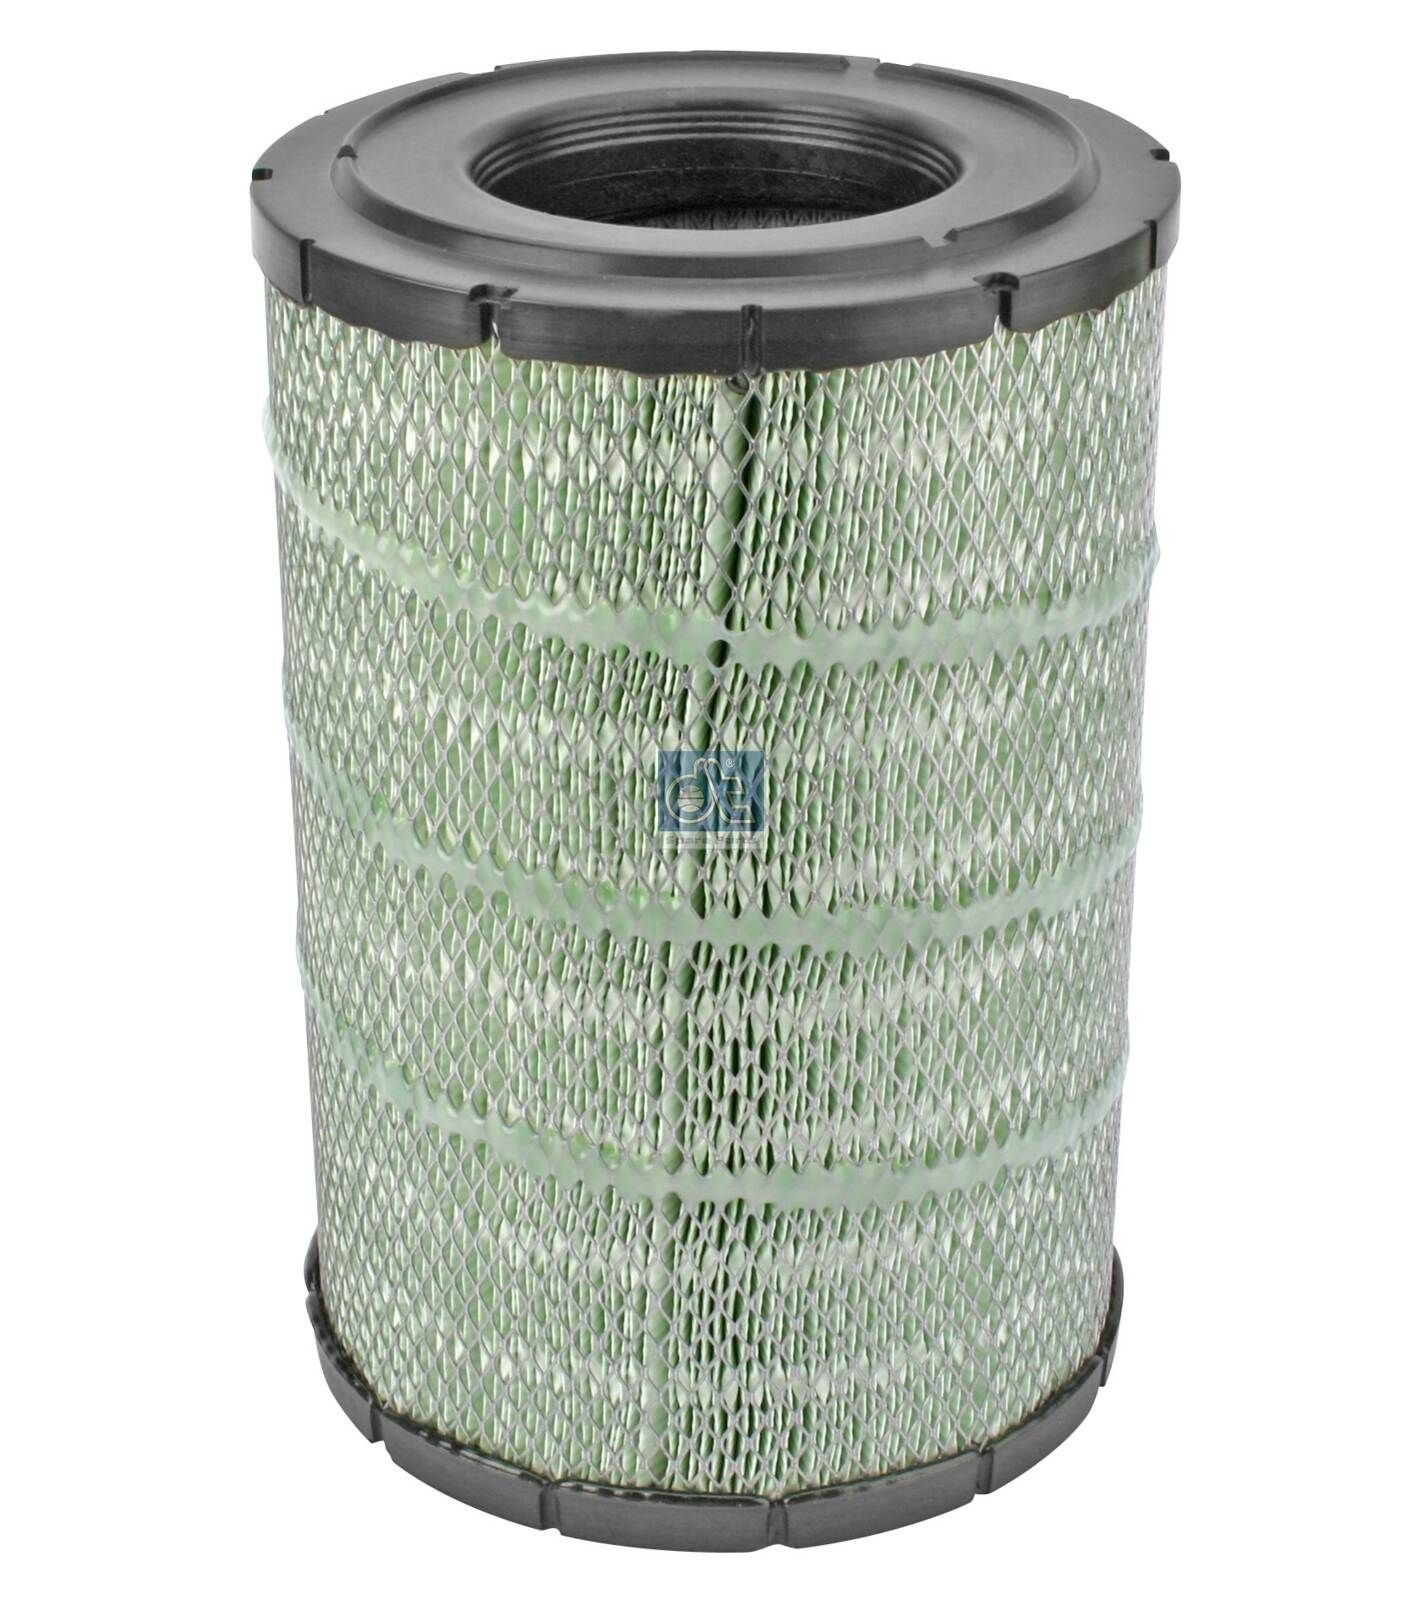 C 25 003 DT Spare Parts 6.25018 Air filter 50 01 865 724